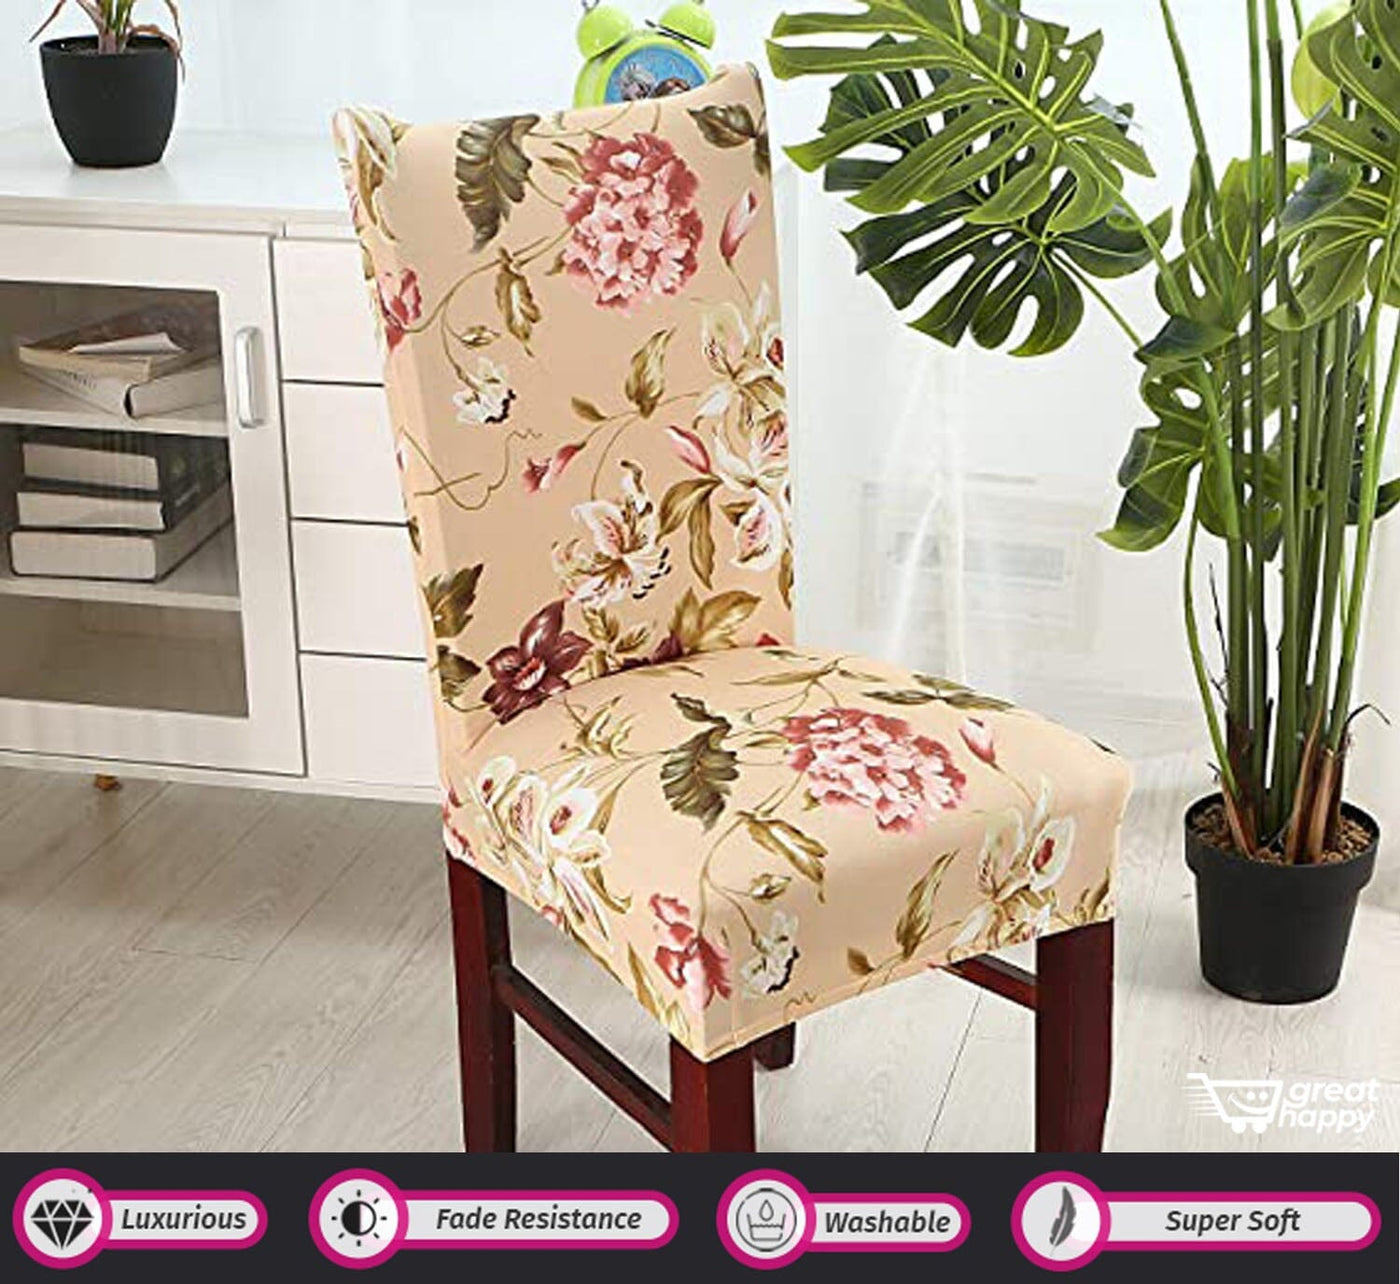 Premium Chair Cover - Stretchable & Elastic Fitted Great Happy IN Beige Flower Pink Green 2 PCS - ₹799 